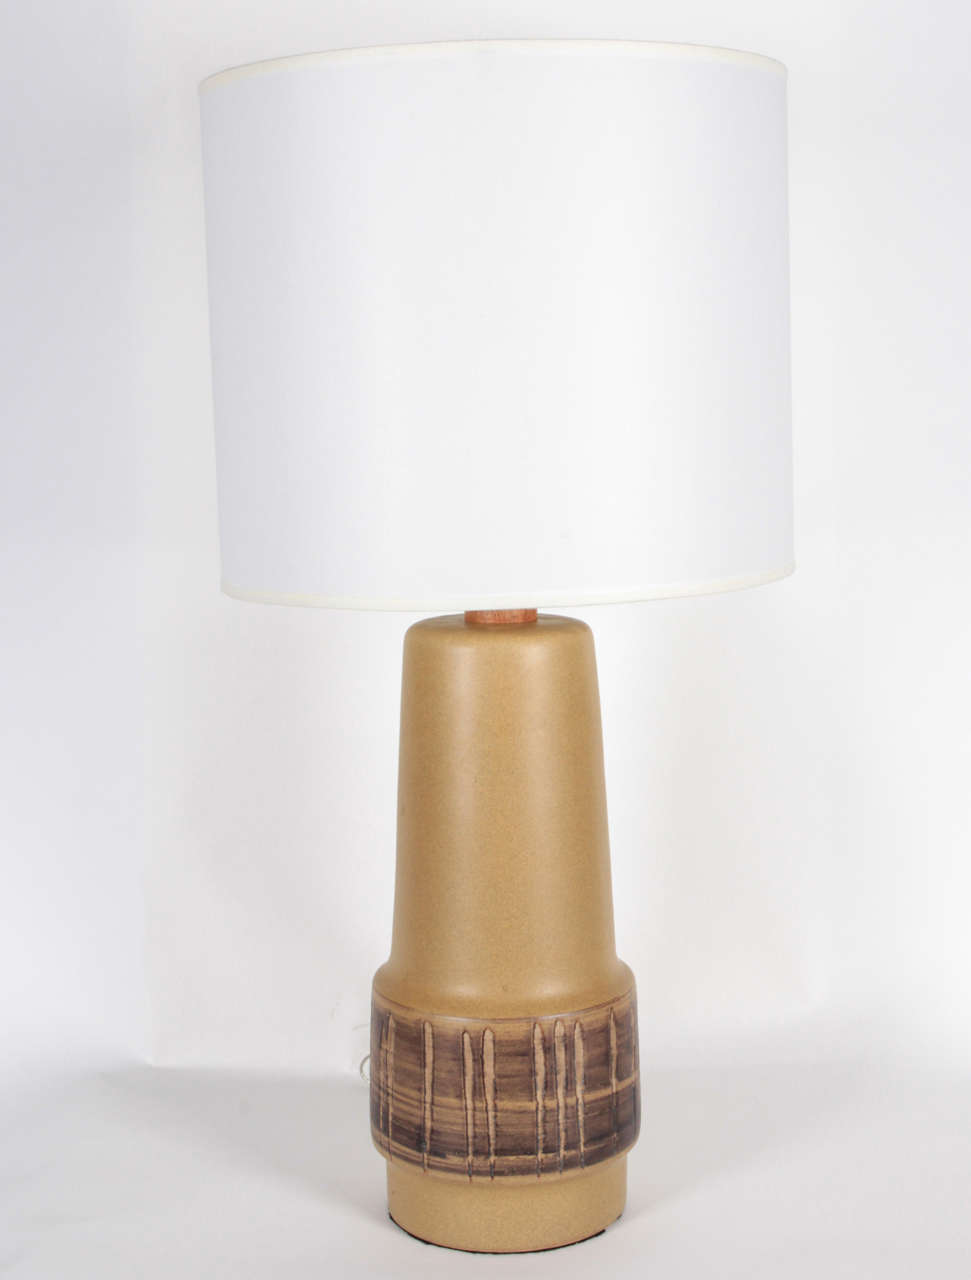 Midcentury pair of Tan glazed ceramic lamps with a contrasting glazed band detail, also with wood necks and finials by Gordon Martz. New wiring and sockets, 100W max bulbs. Shades not included.